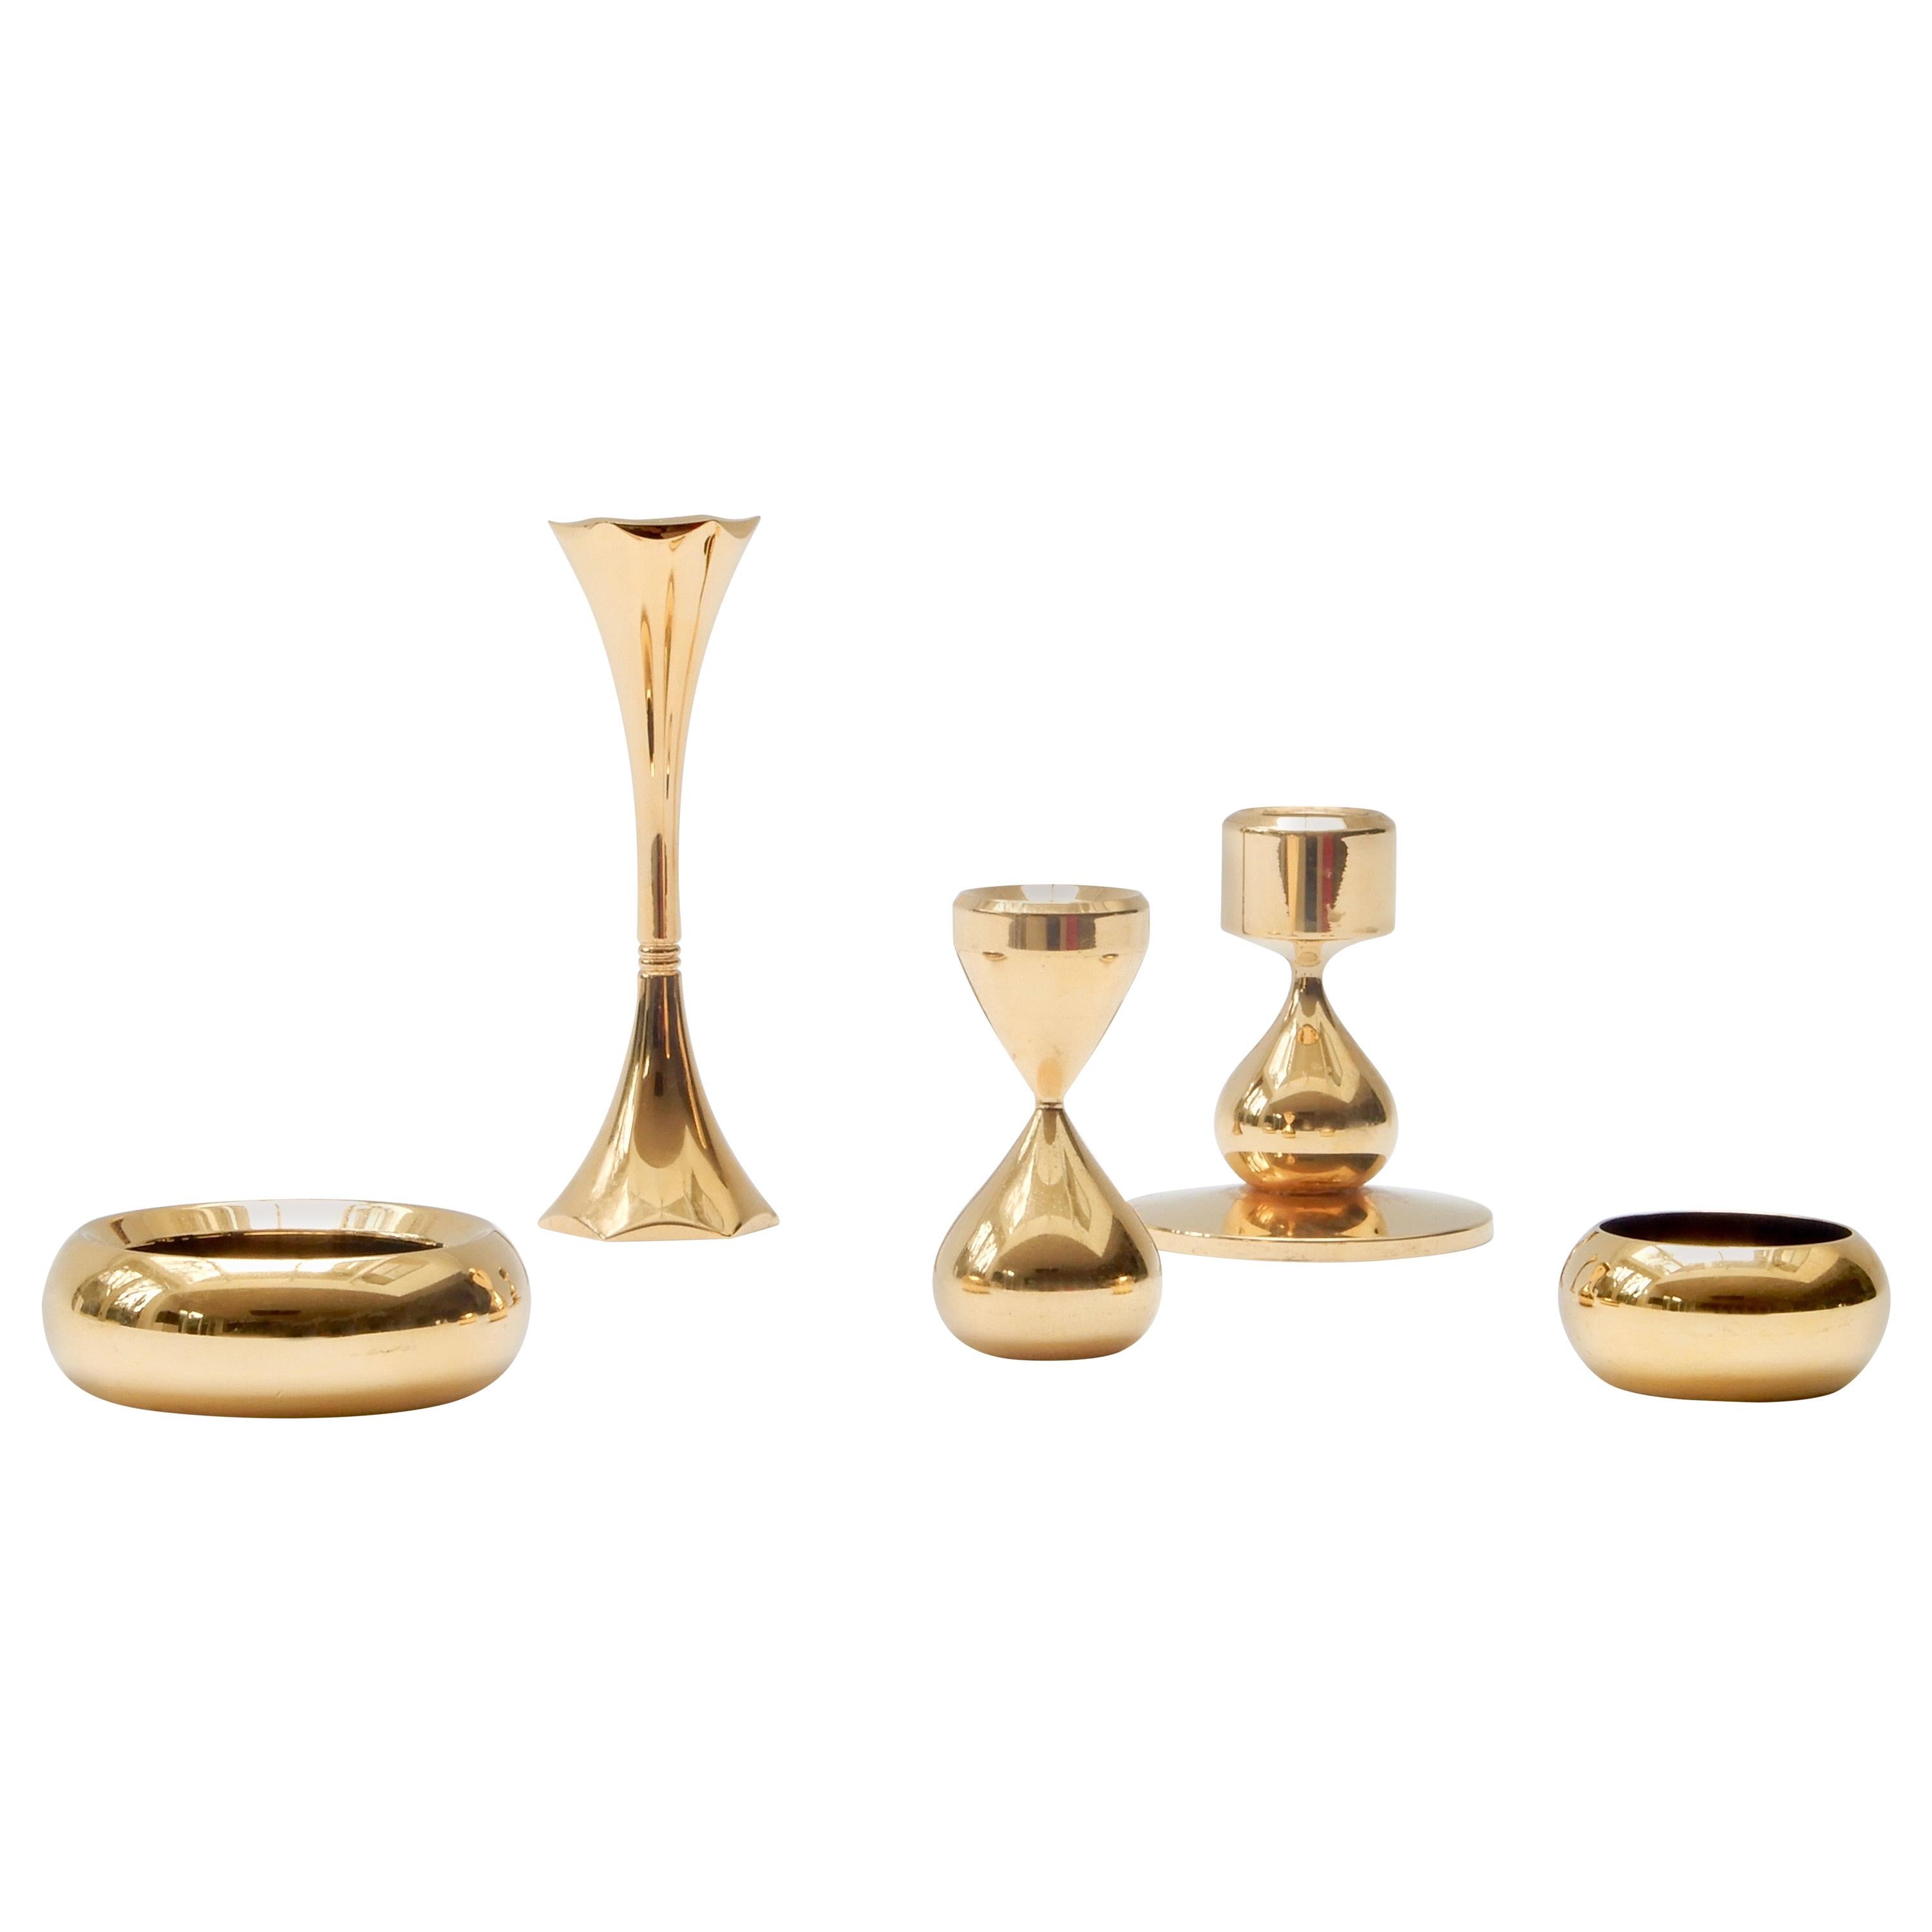 Set of 5 Danish 24-Carat Gold-Plated Candleholders by Hugo Asmussen, 1960s